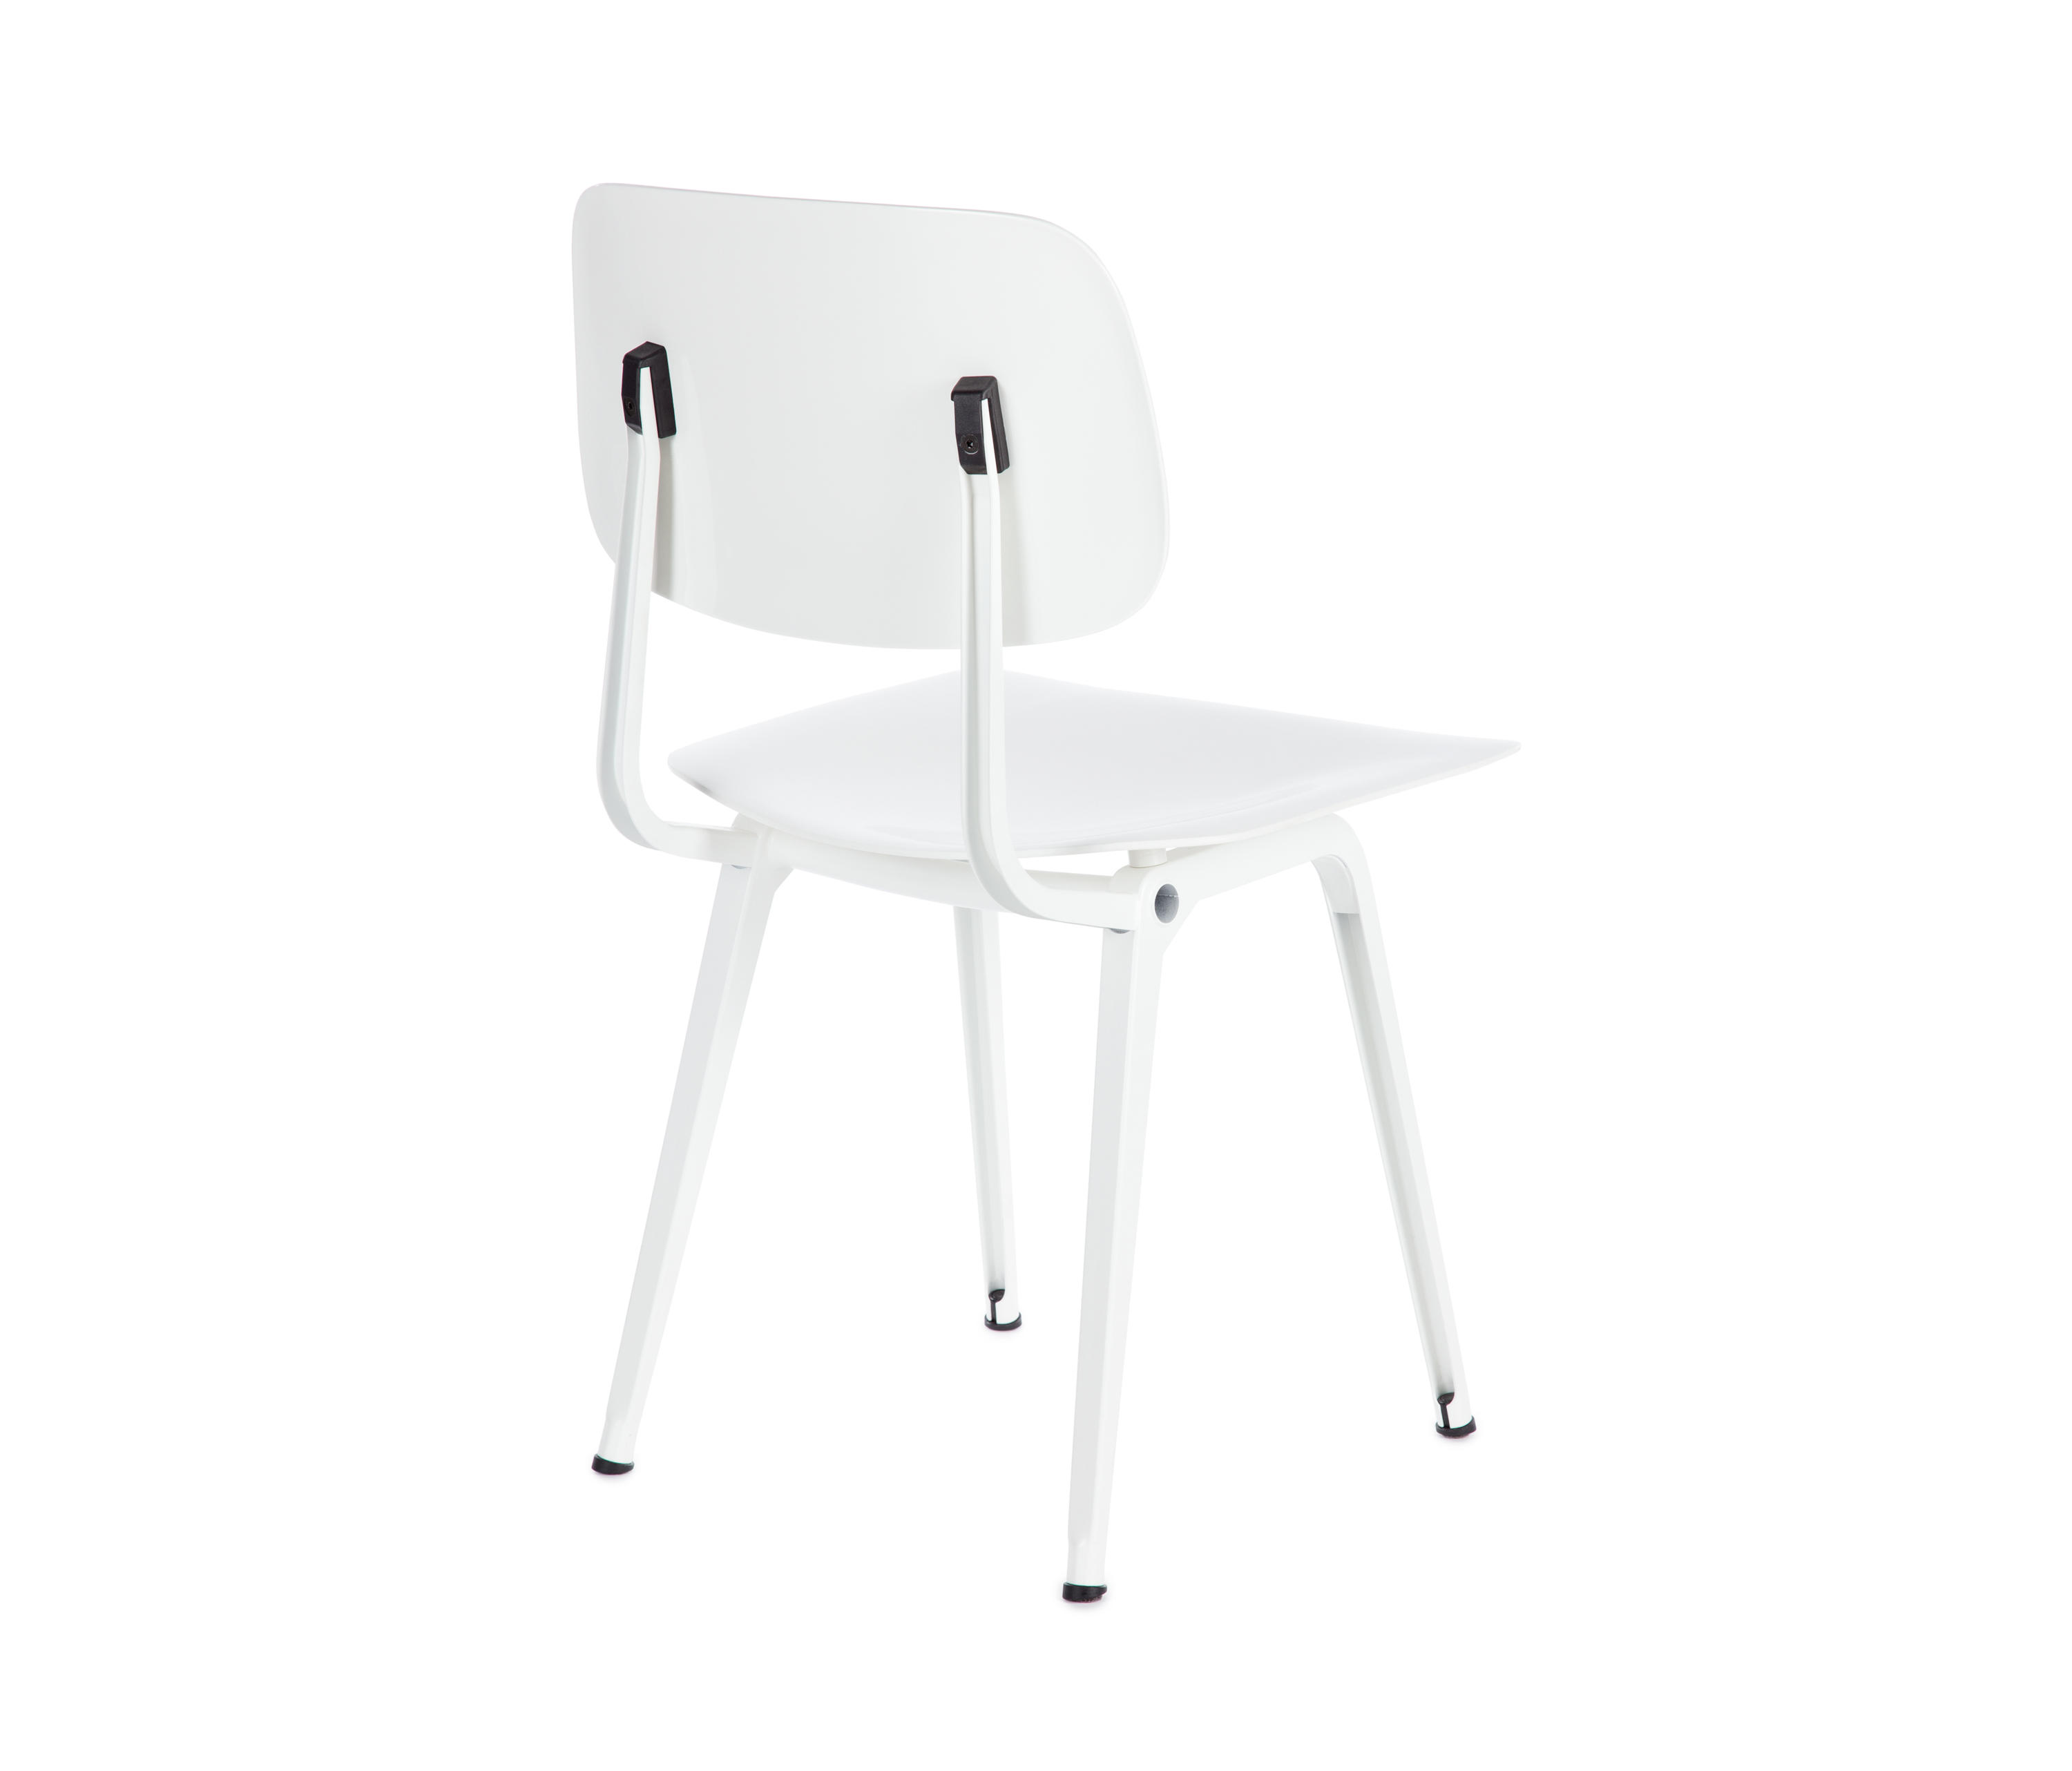 REVOLT - Chairs from Ahrend | Architonic